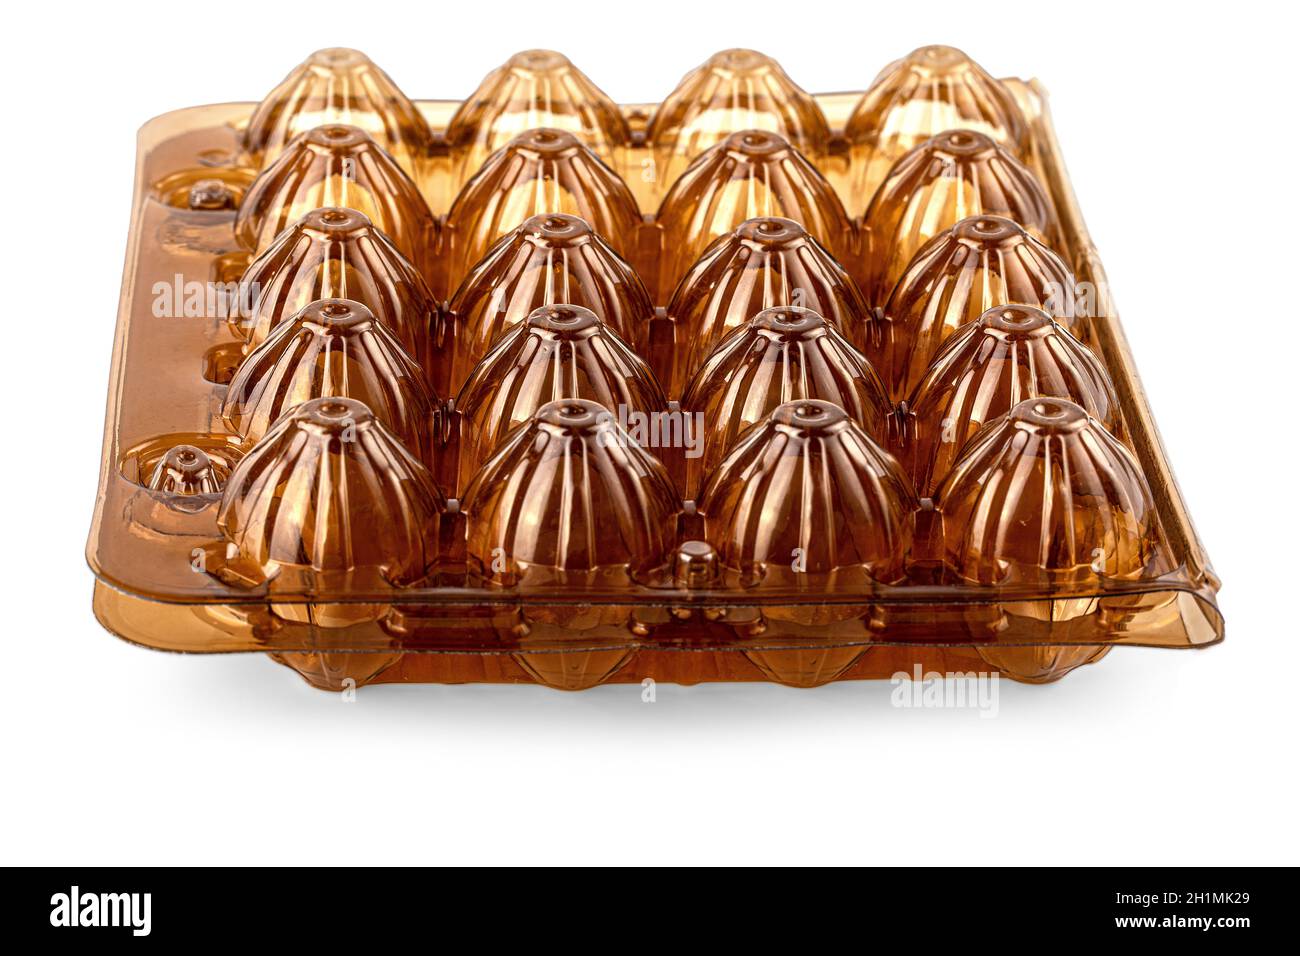 The empy plastic container for Quail eggs Stock Photo